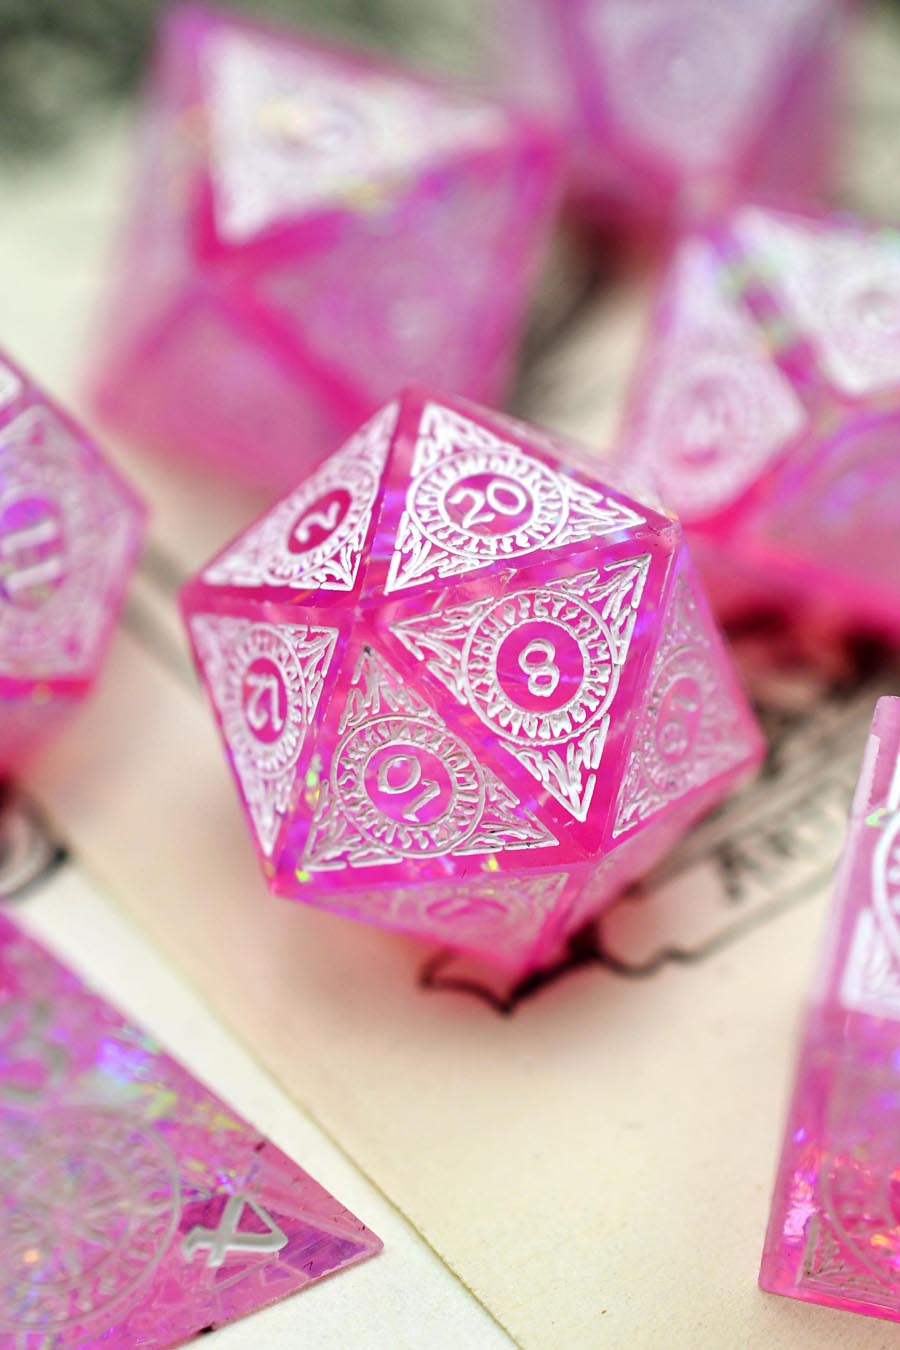 Runic Synthwave - Sharp-Edged Resin Dice Set